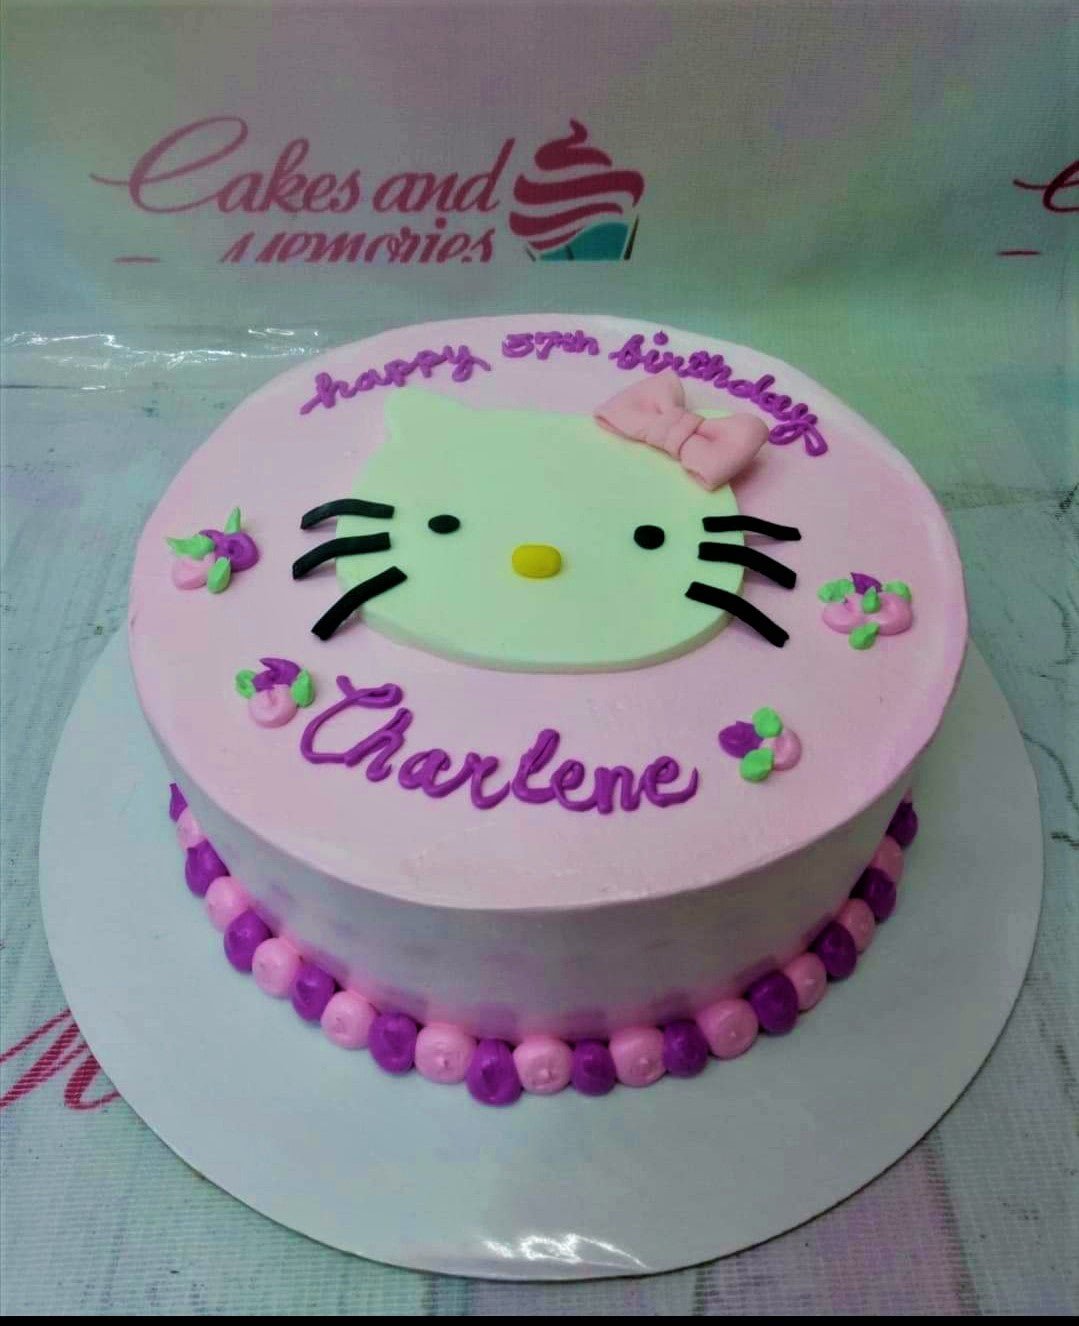 hello kitty cake inspo✨ | Gallery posted by Maria Rojas✨ | Lemon8